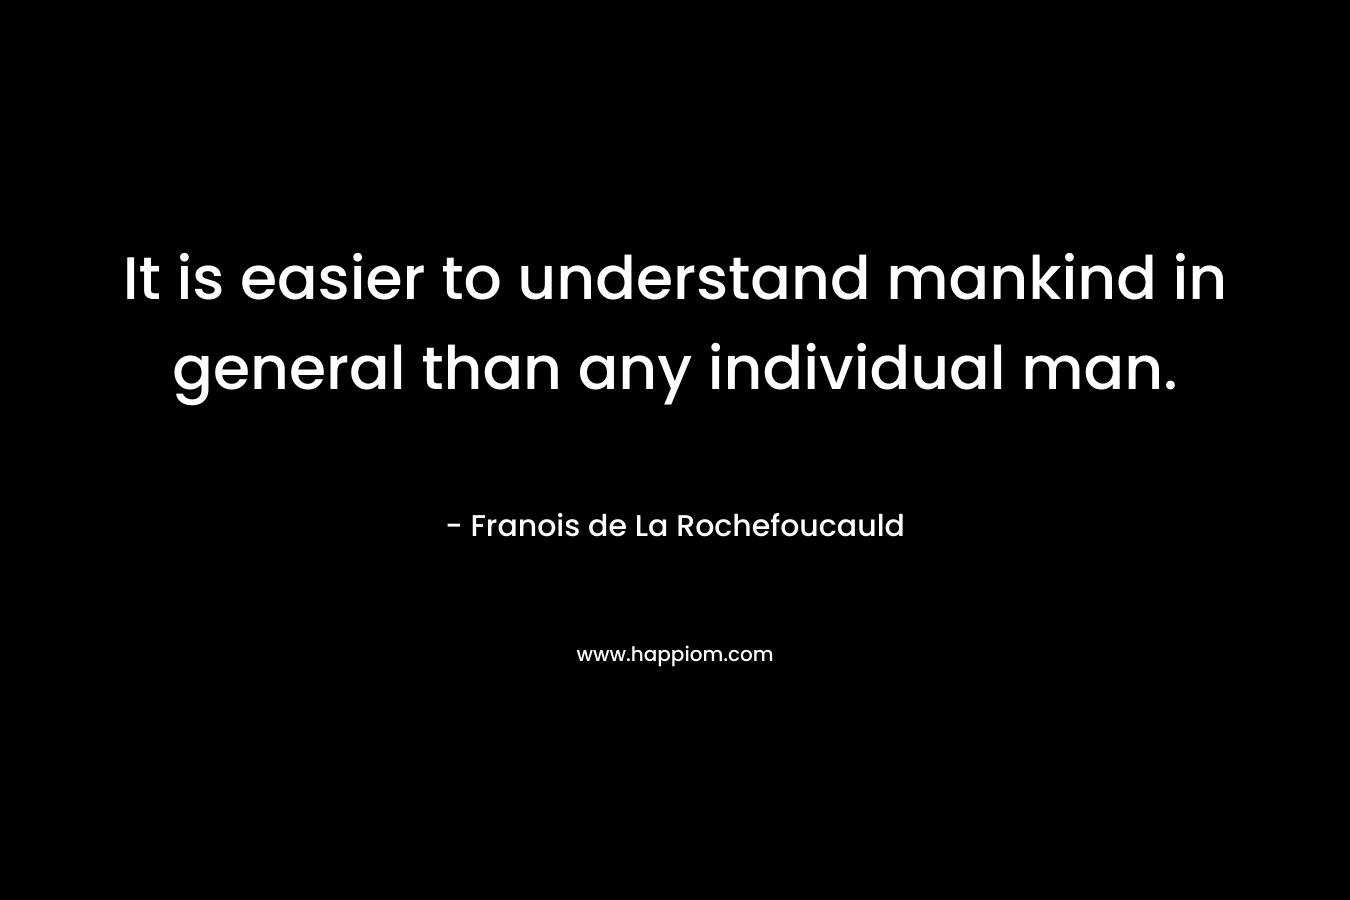 It is easier to understand mankind in general than any individual man. – Franois de La Rochefoucauld